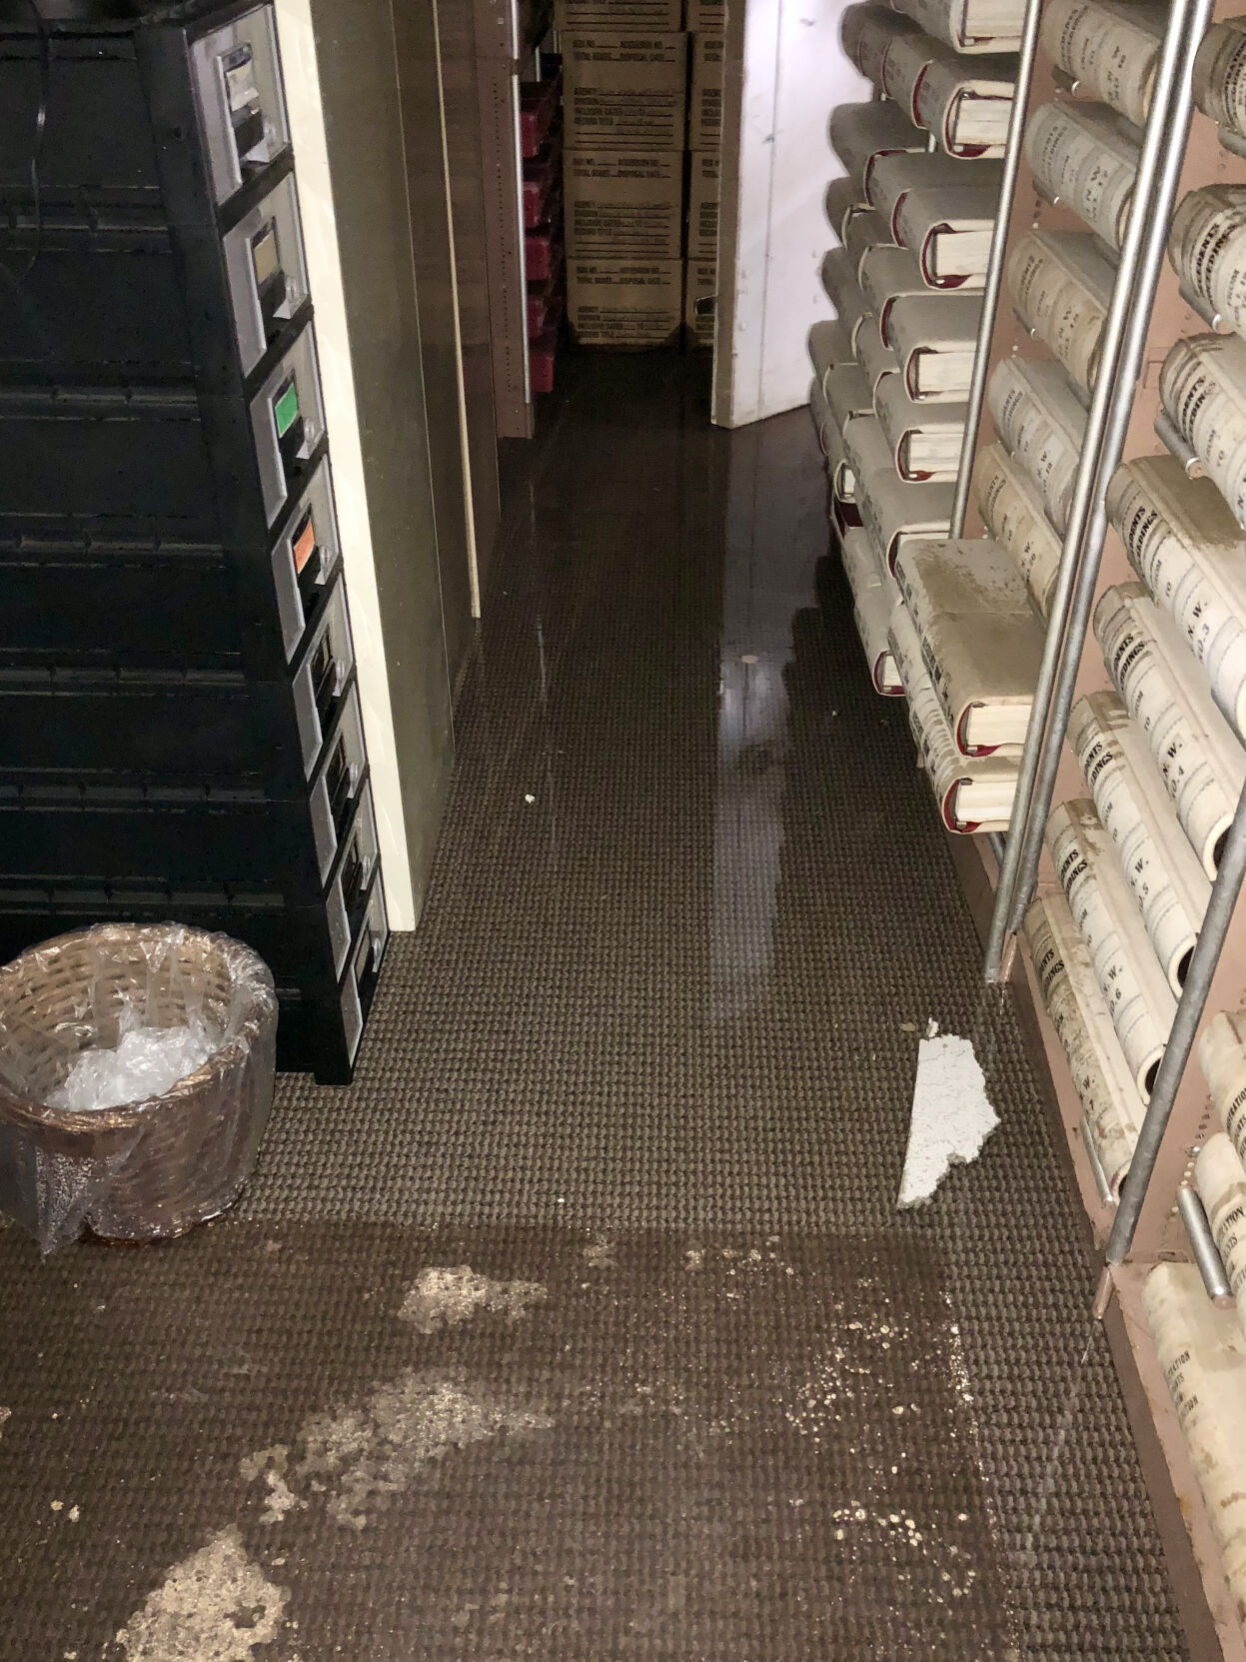 Fire causes significant water damage in Talbot County Courthouse